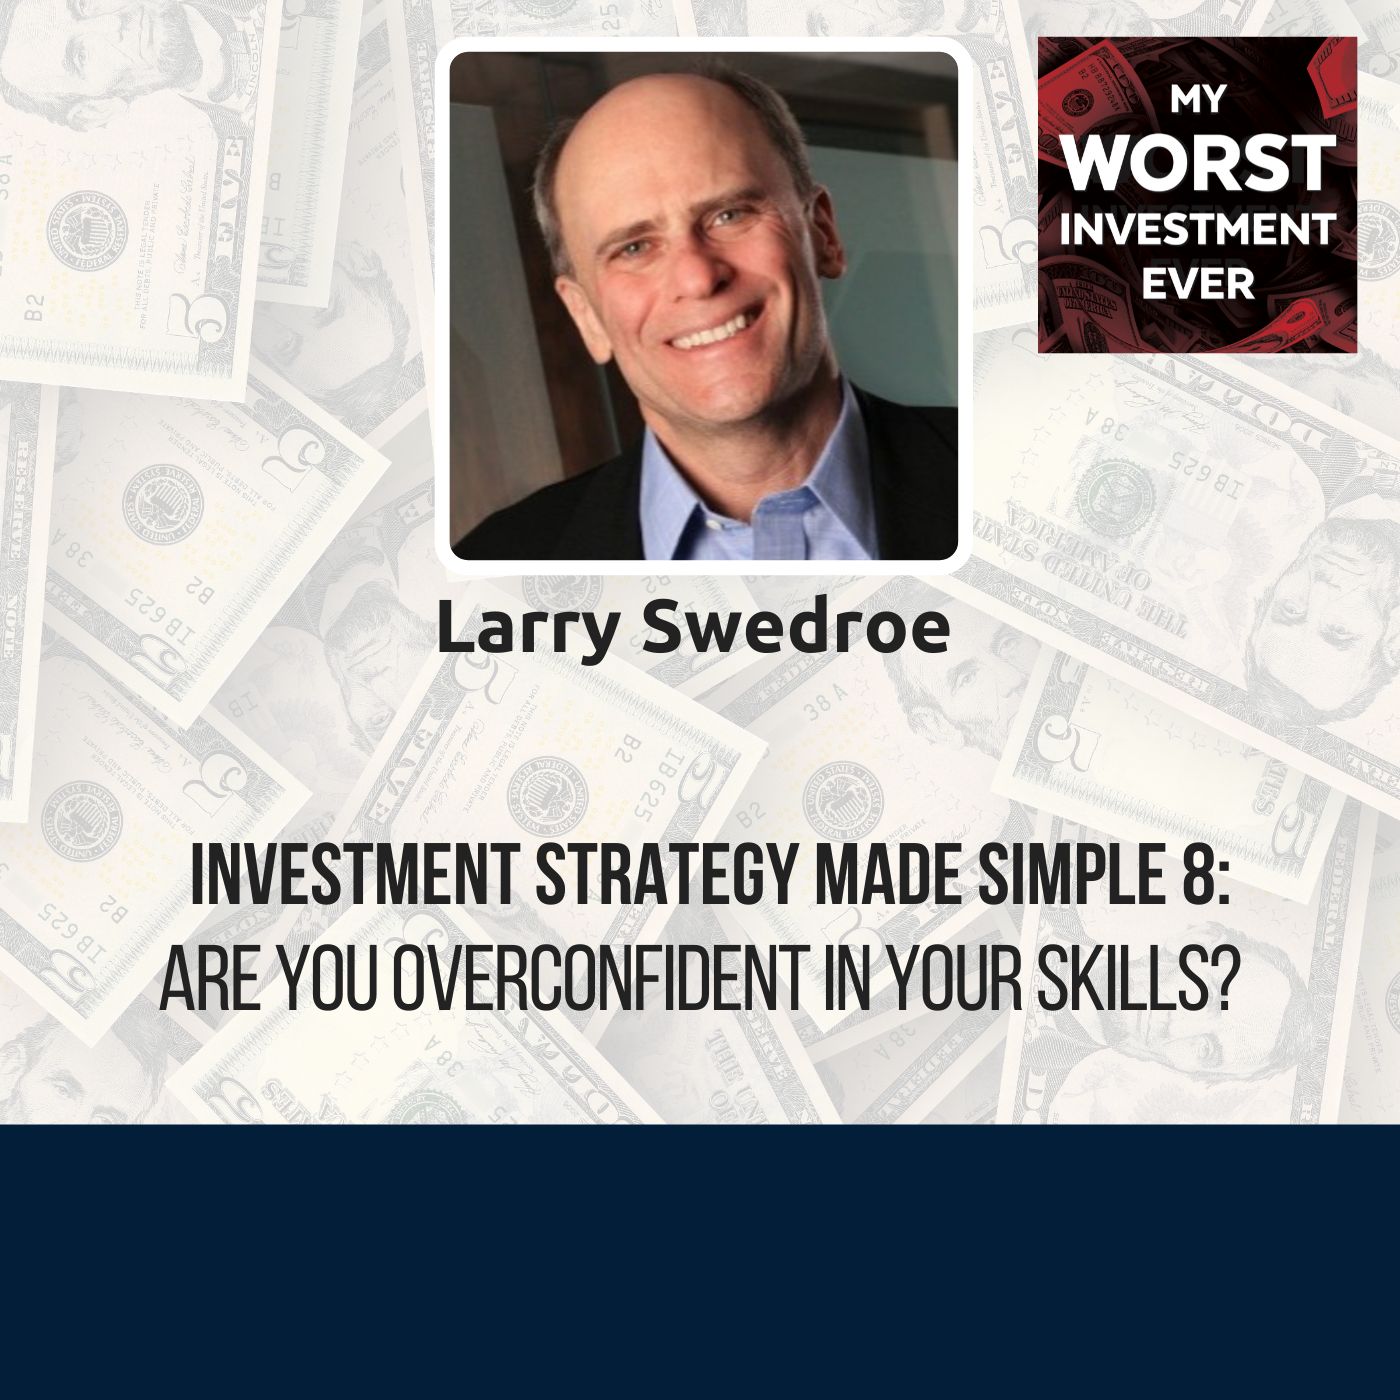 ISMS 8: Larry Swedroe – Are You Overconfident in Your Skills?